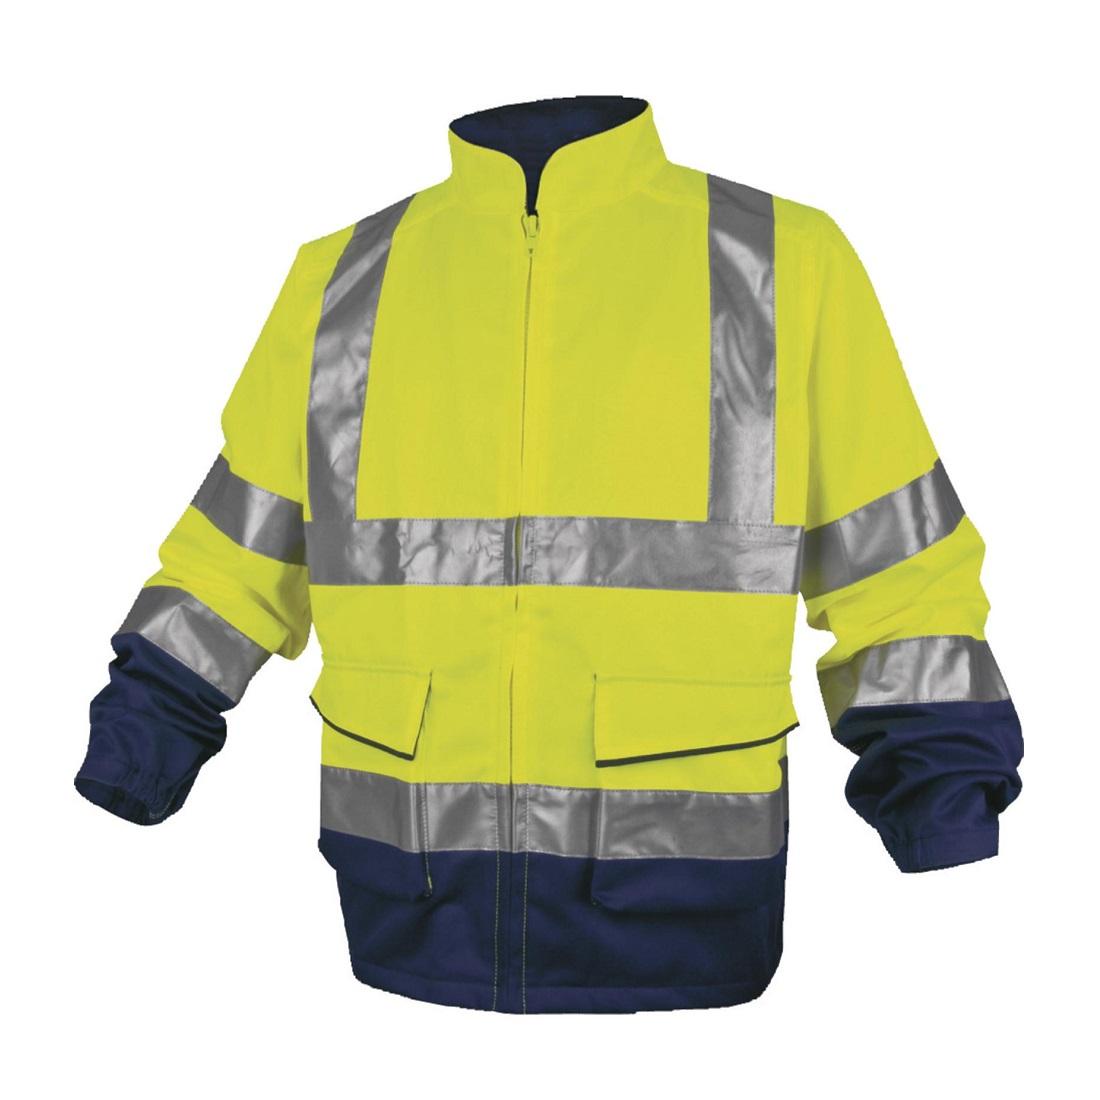 Safetyware - DELTA PLUS Panostyle High Visibility Working Jacket in  Polyester/Cotton